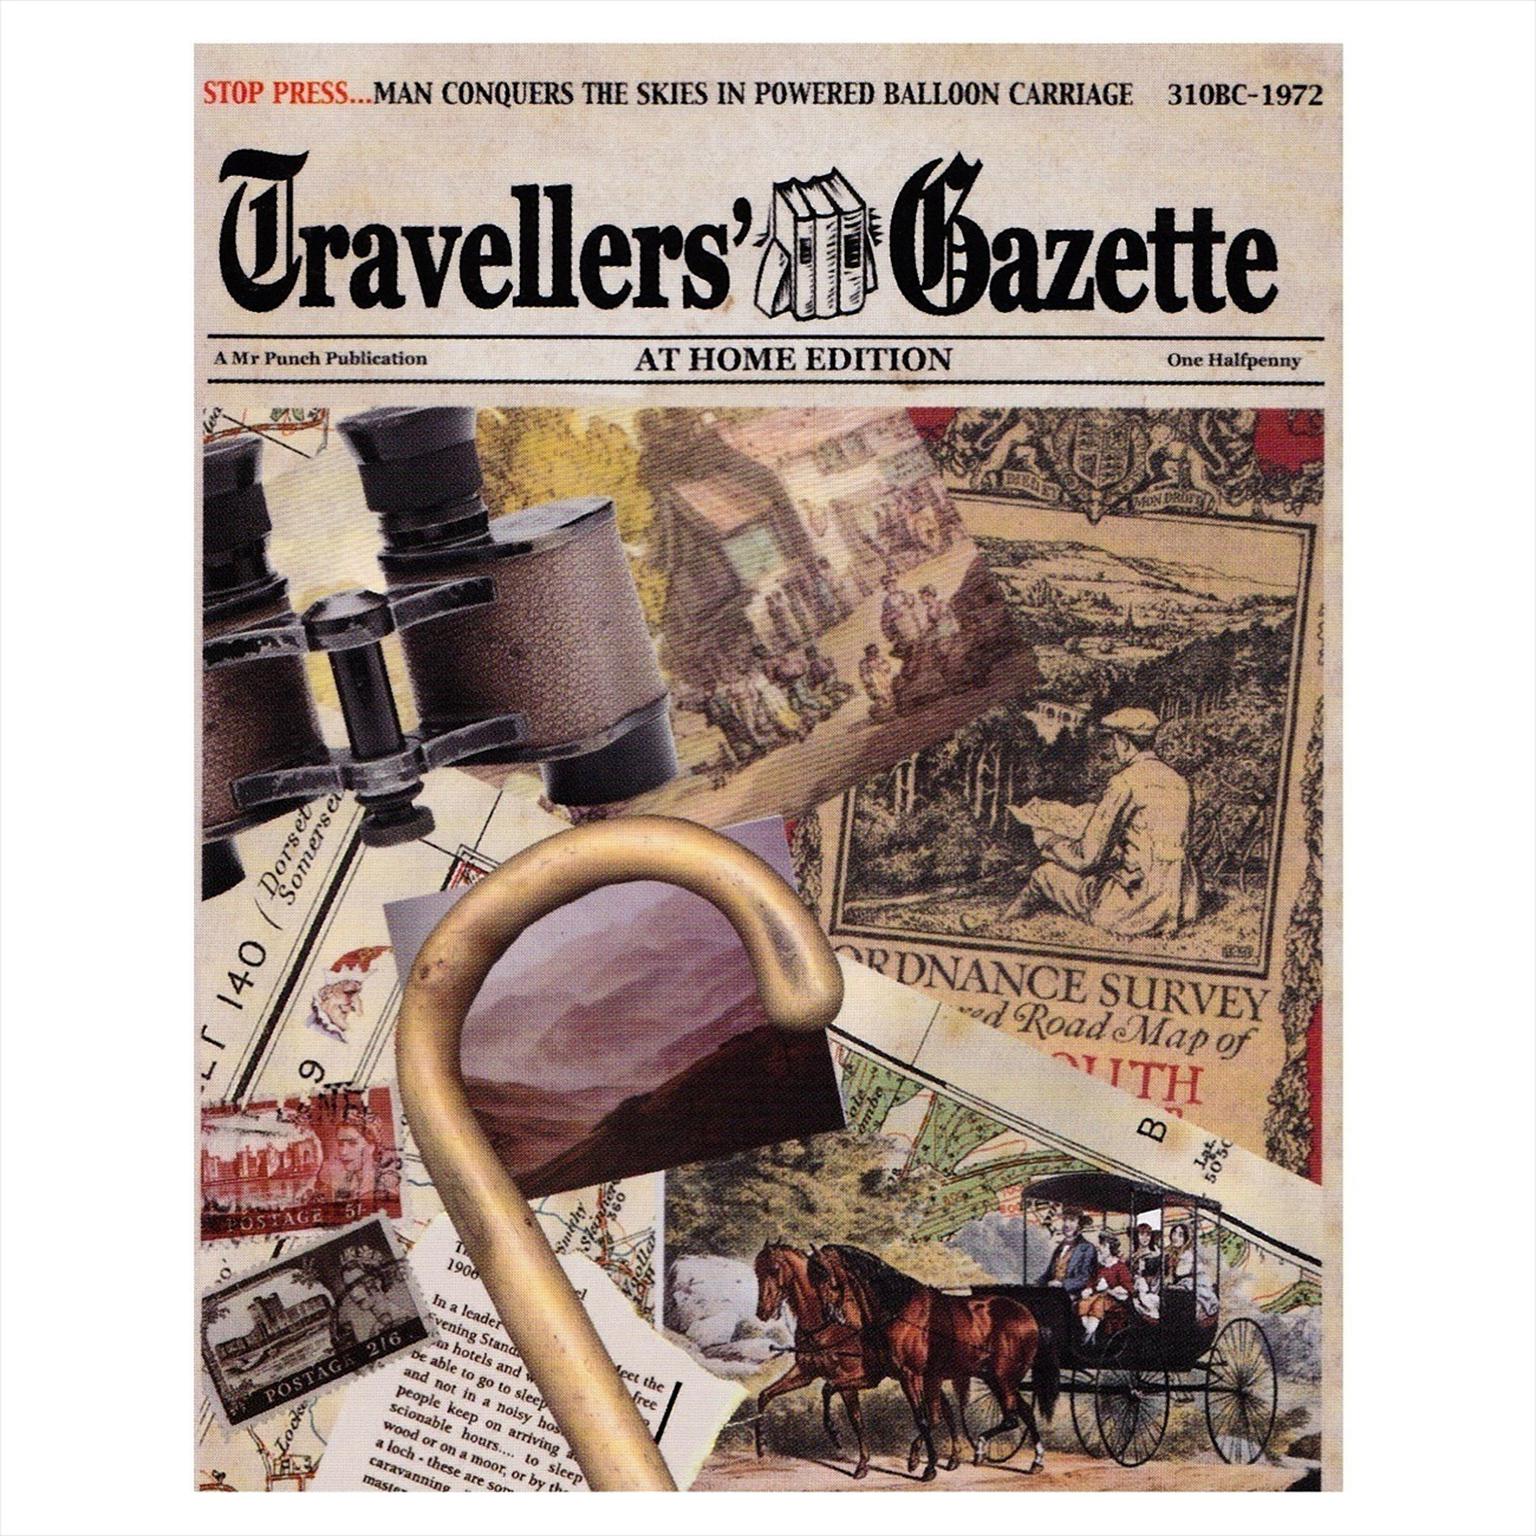 Traveller’s Gazette, Part One: Travel at Home Audiobook, by Sue Rodwell